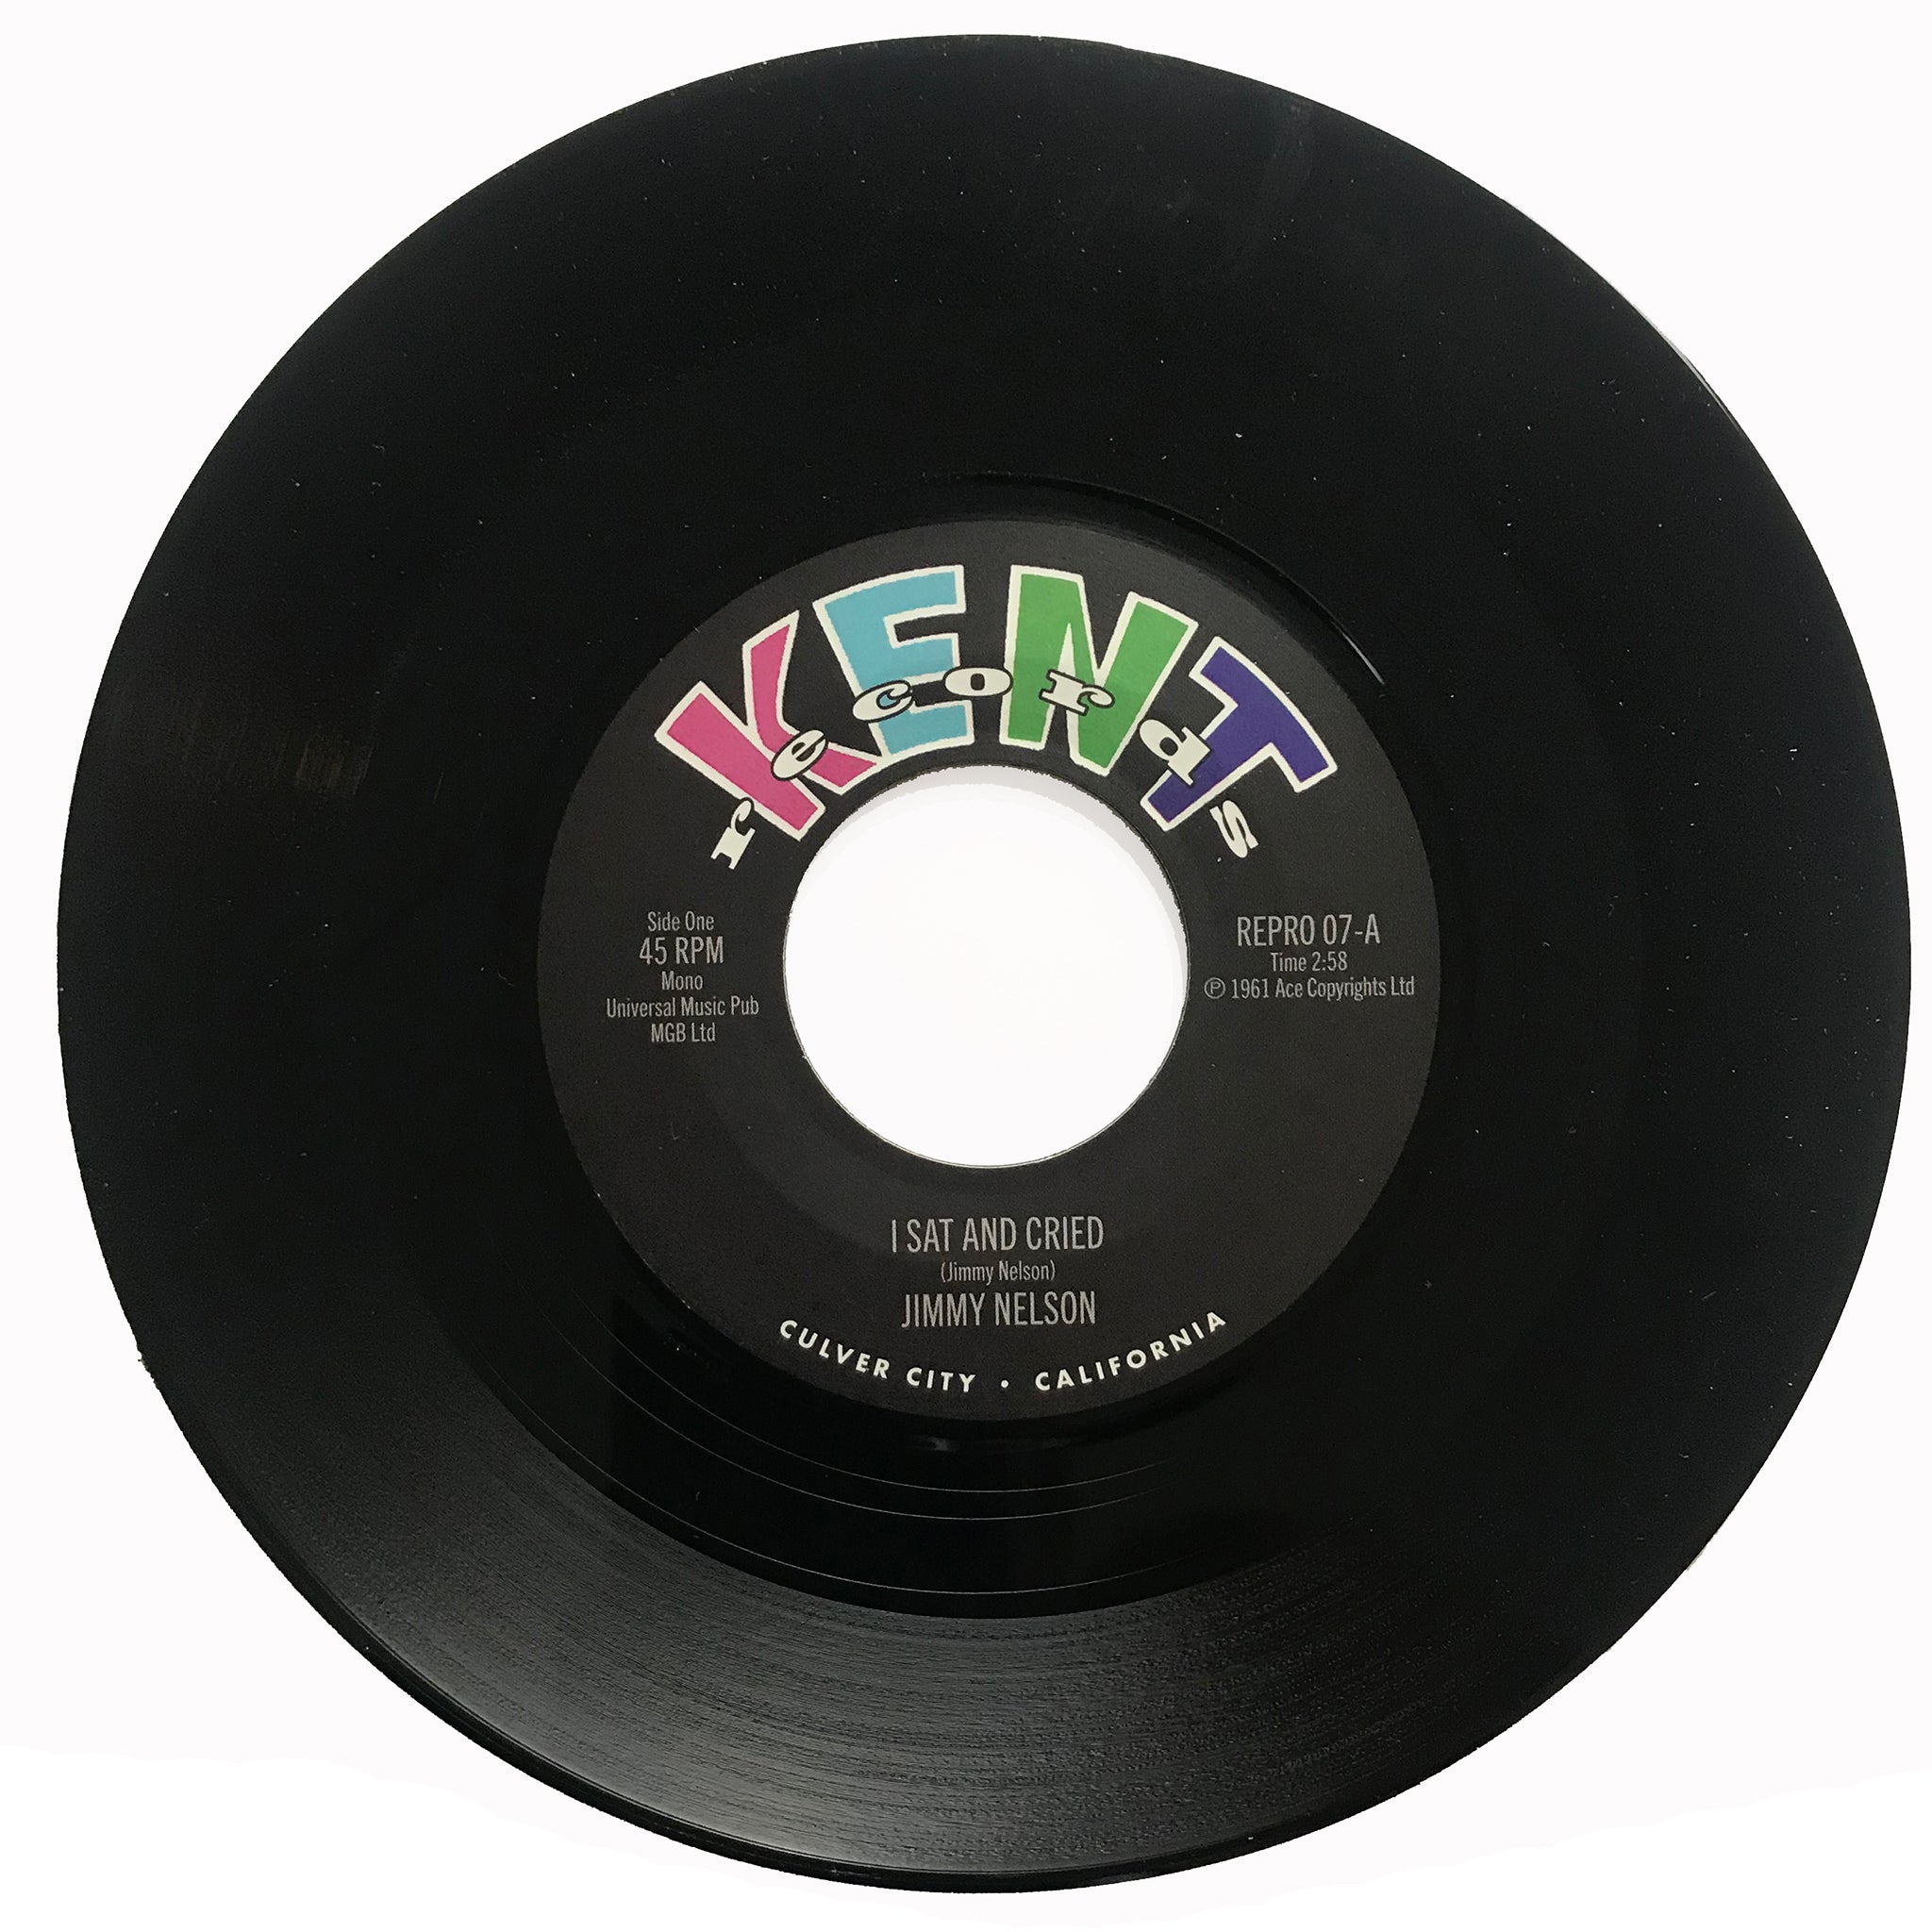 Jimmy-Nelson-I-Sat-And-Cried-Kent-Repro-07-RnB-Soul